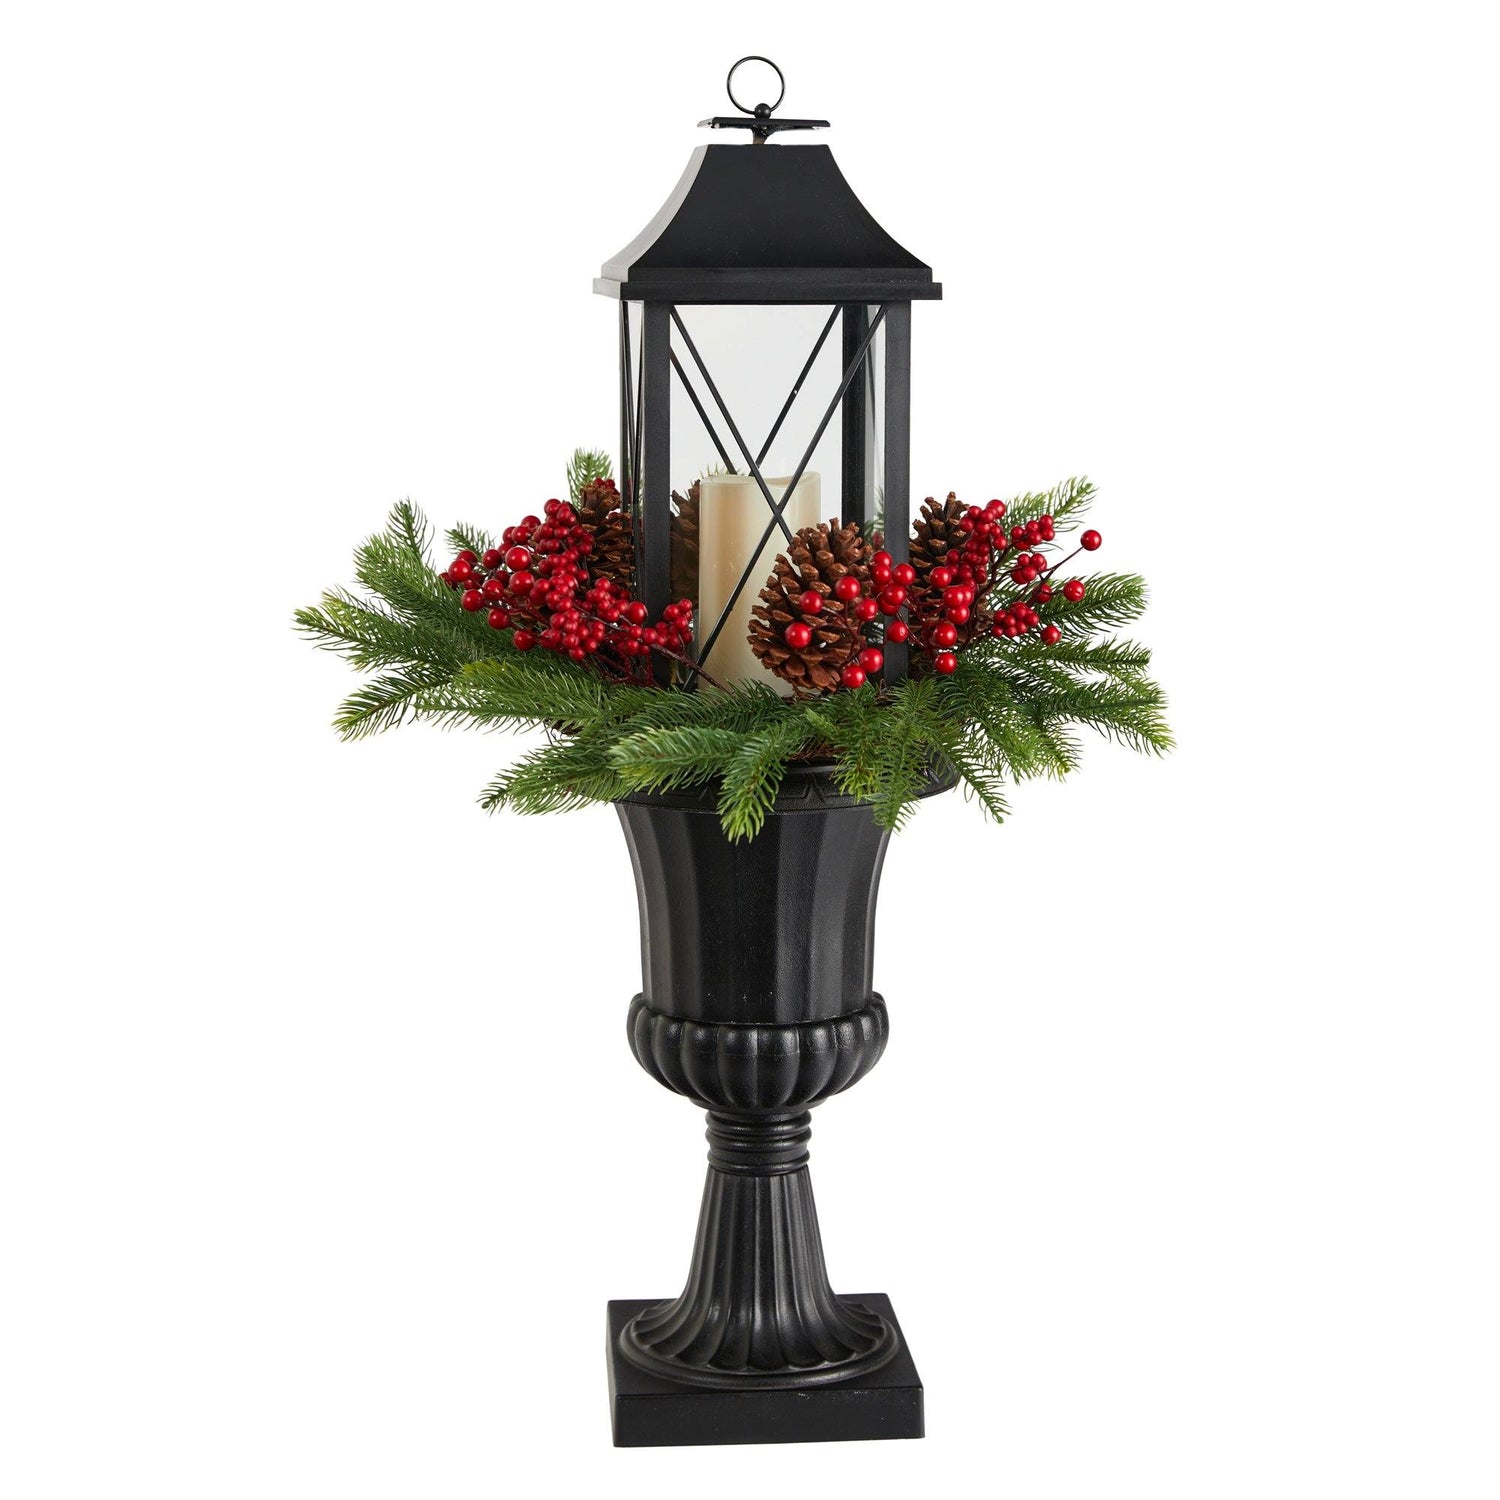 33” Holiday Greenery, Berries and Pinecones in Decorative Urn with Large Lantern